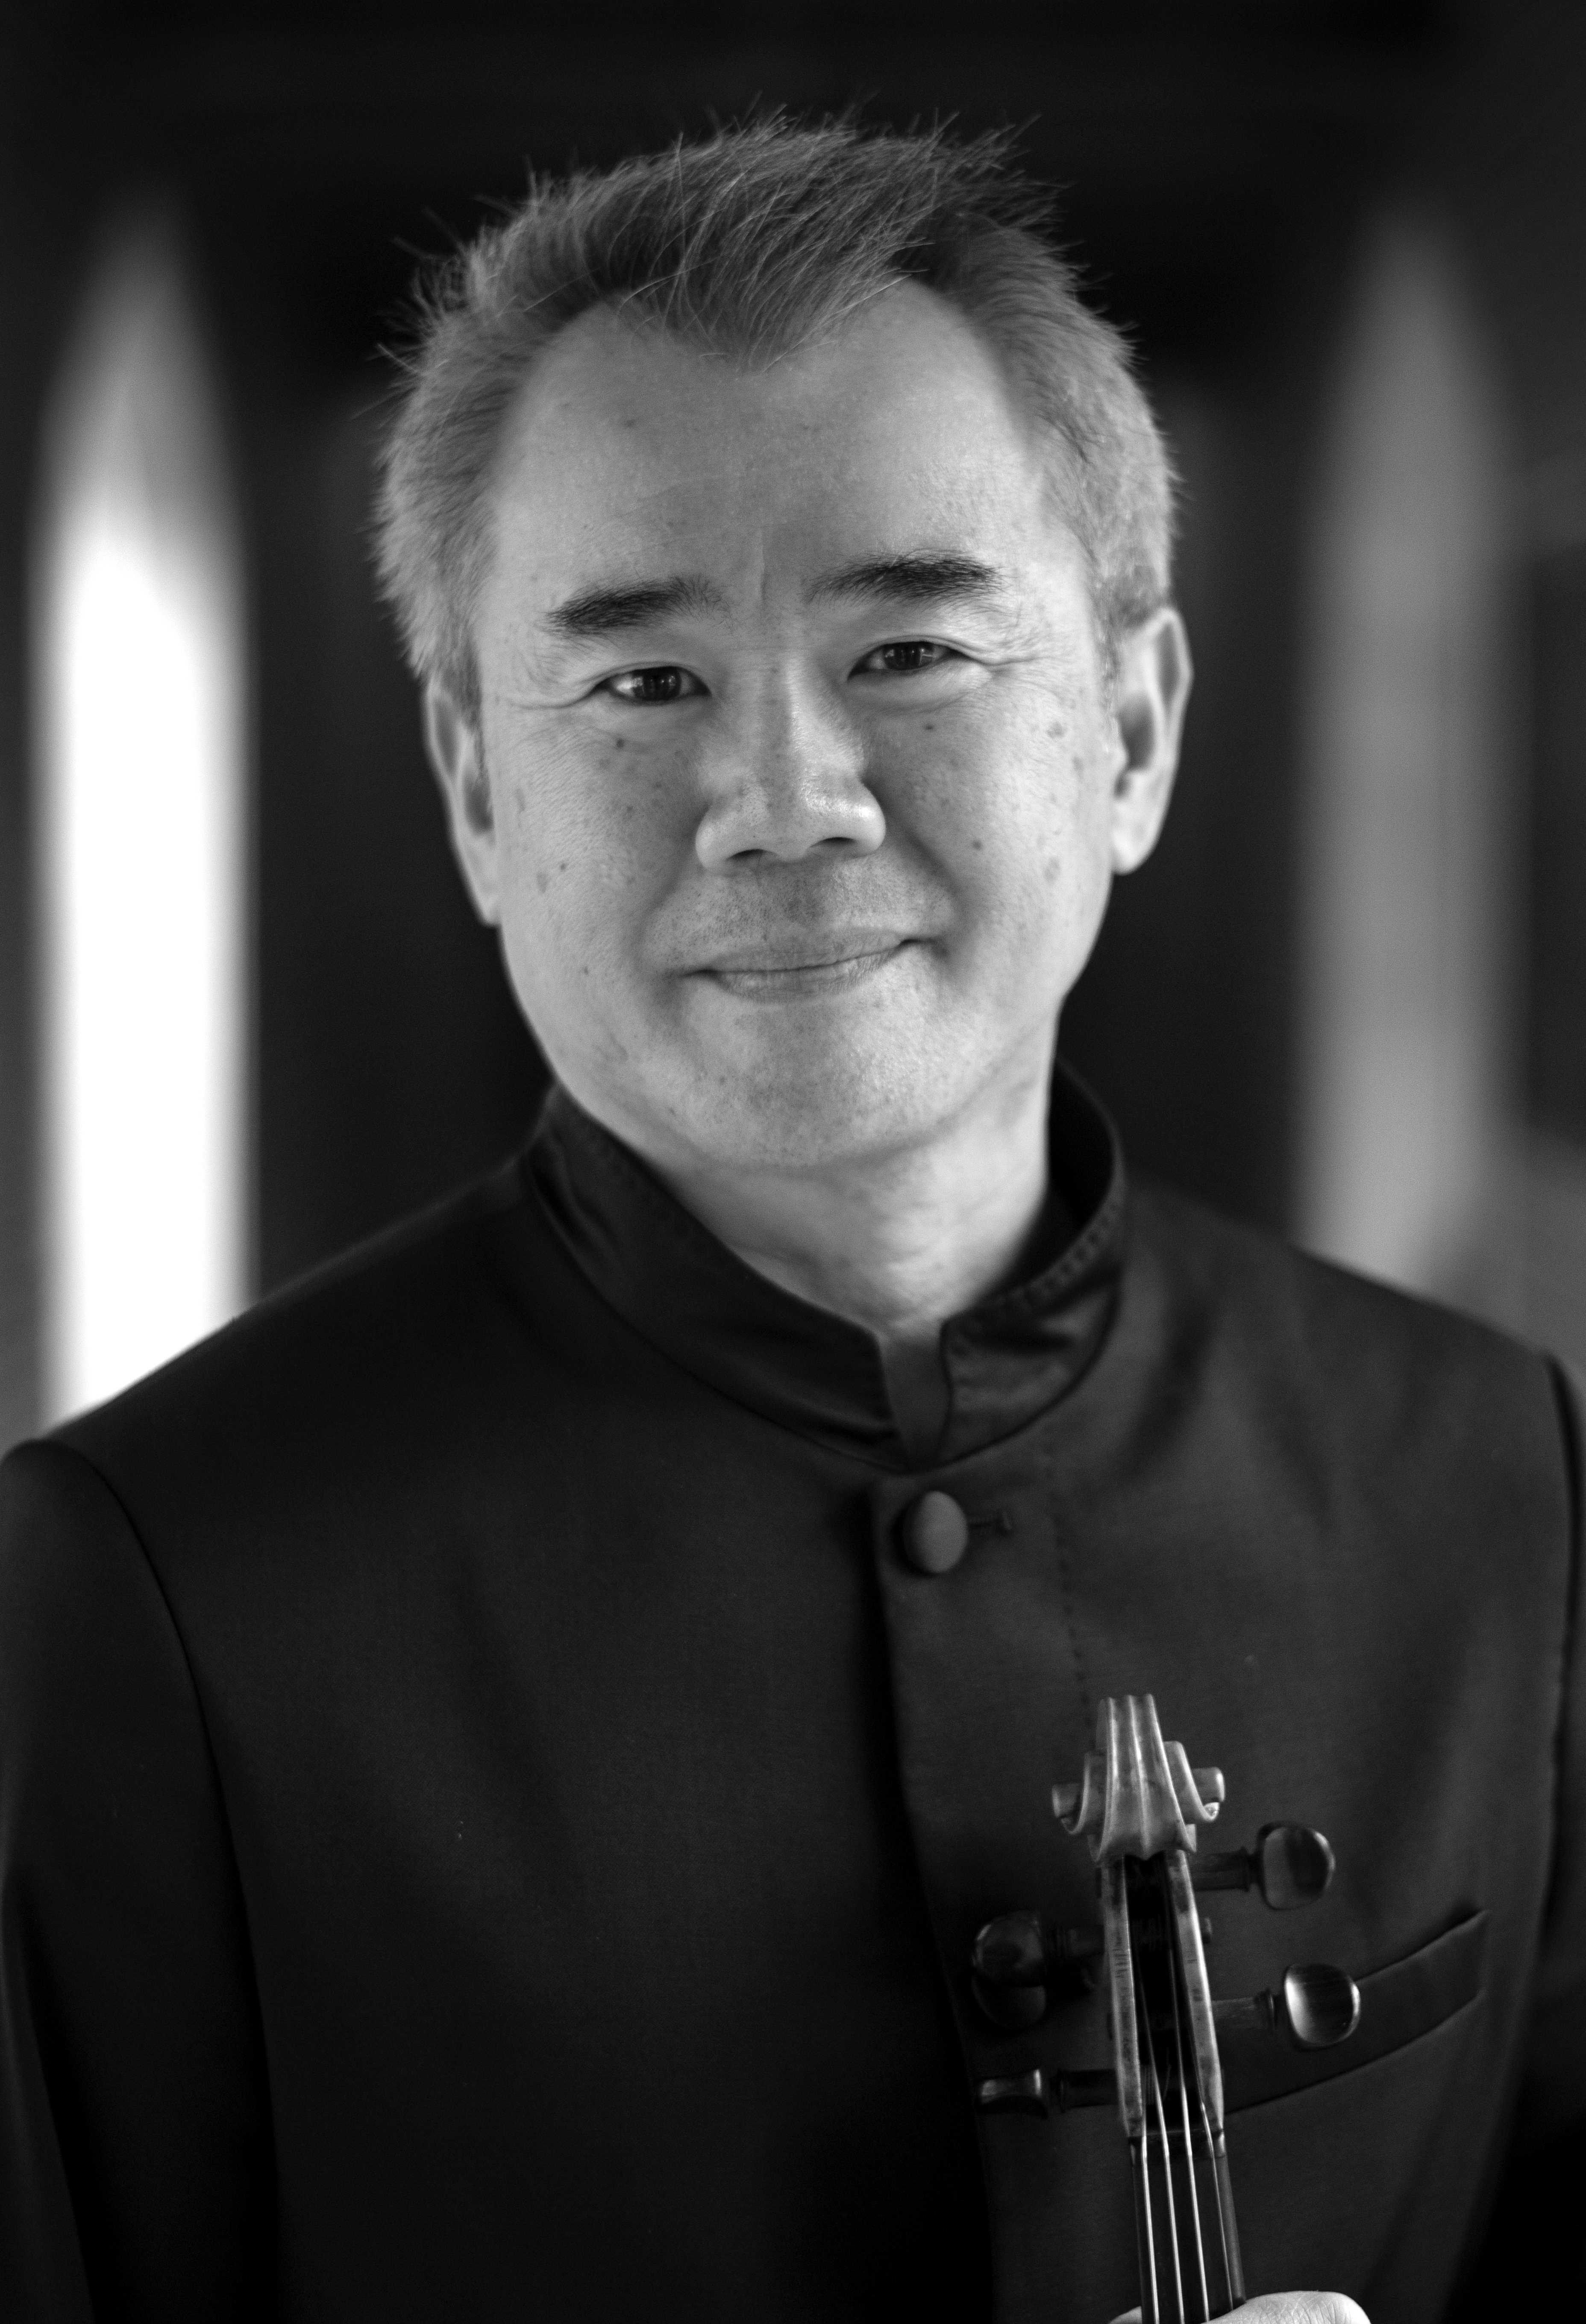 Middle-aged Asian man wearing all black suit and holding violin. He has grey hair and is smiling.